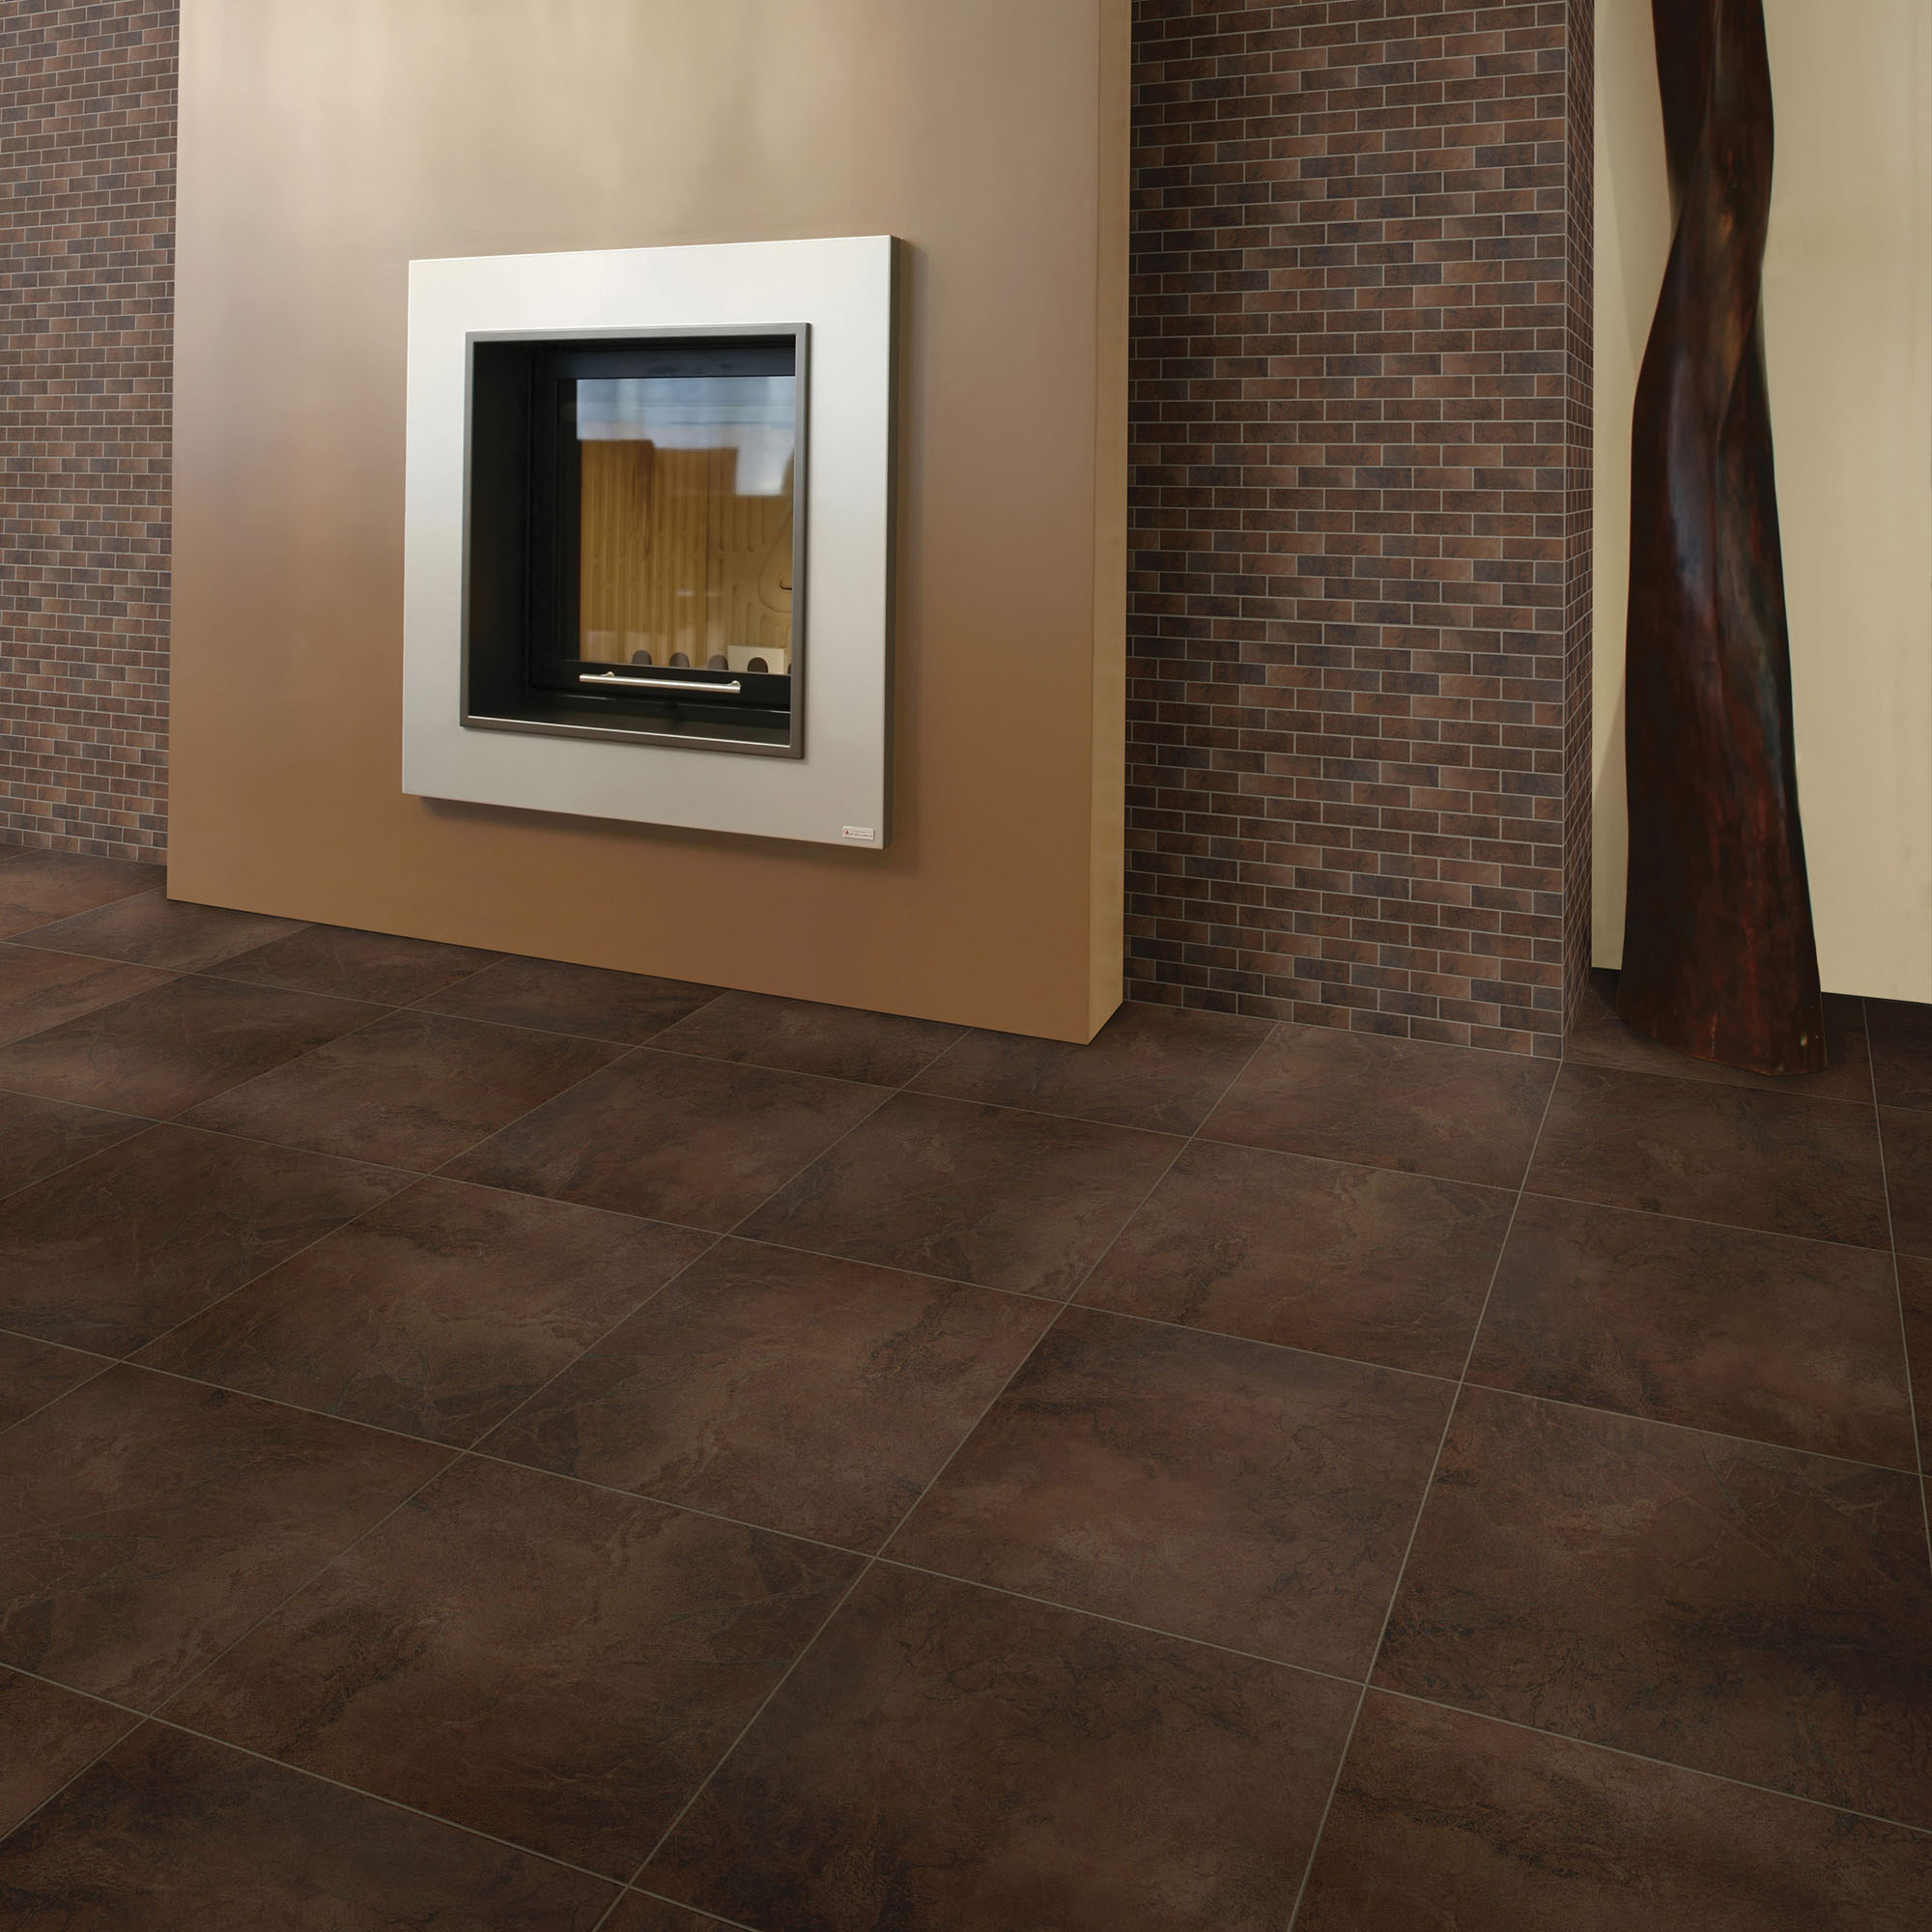 Does Luxury Vinyl Tile Flooring Require Grout 3?